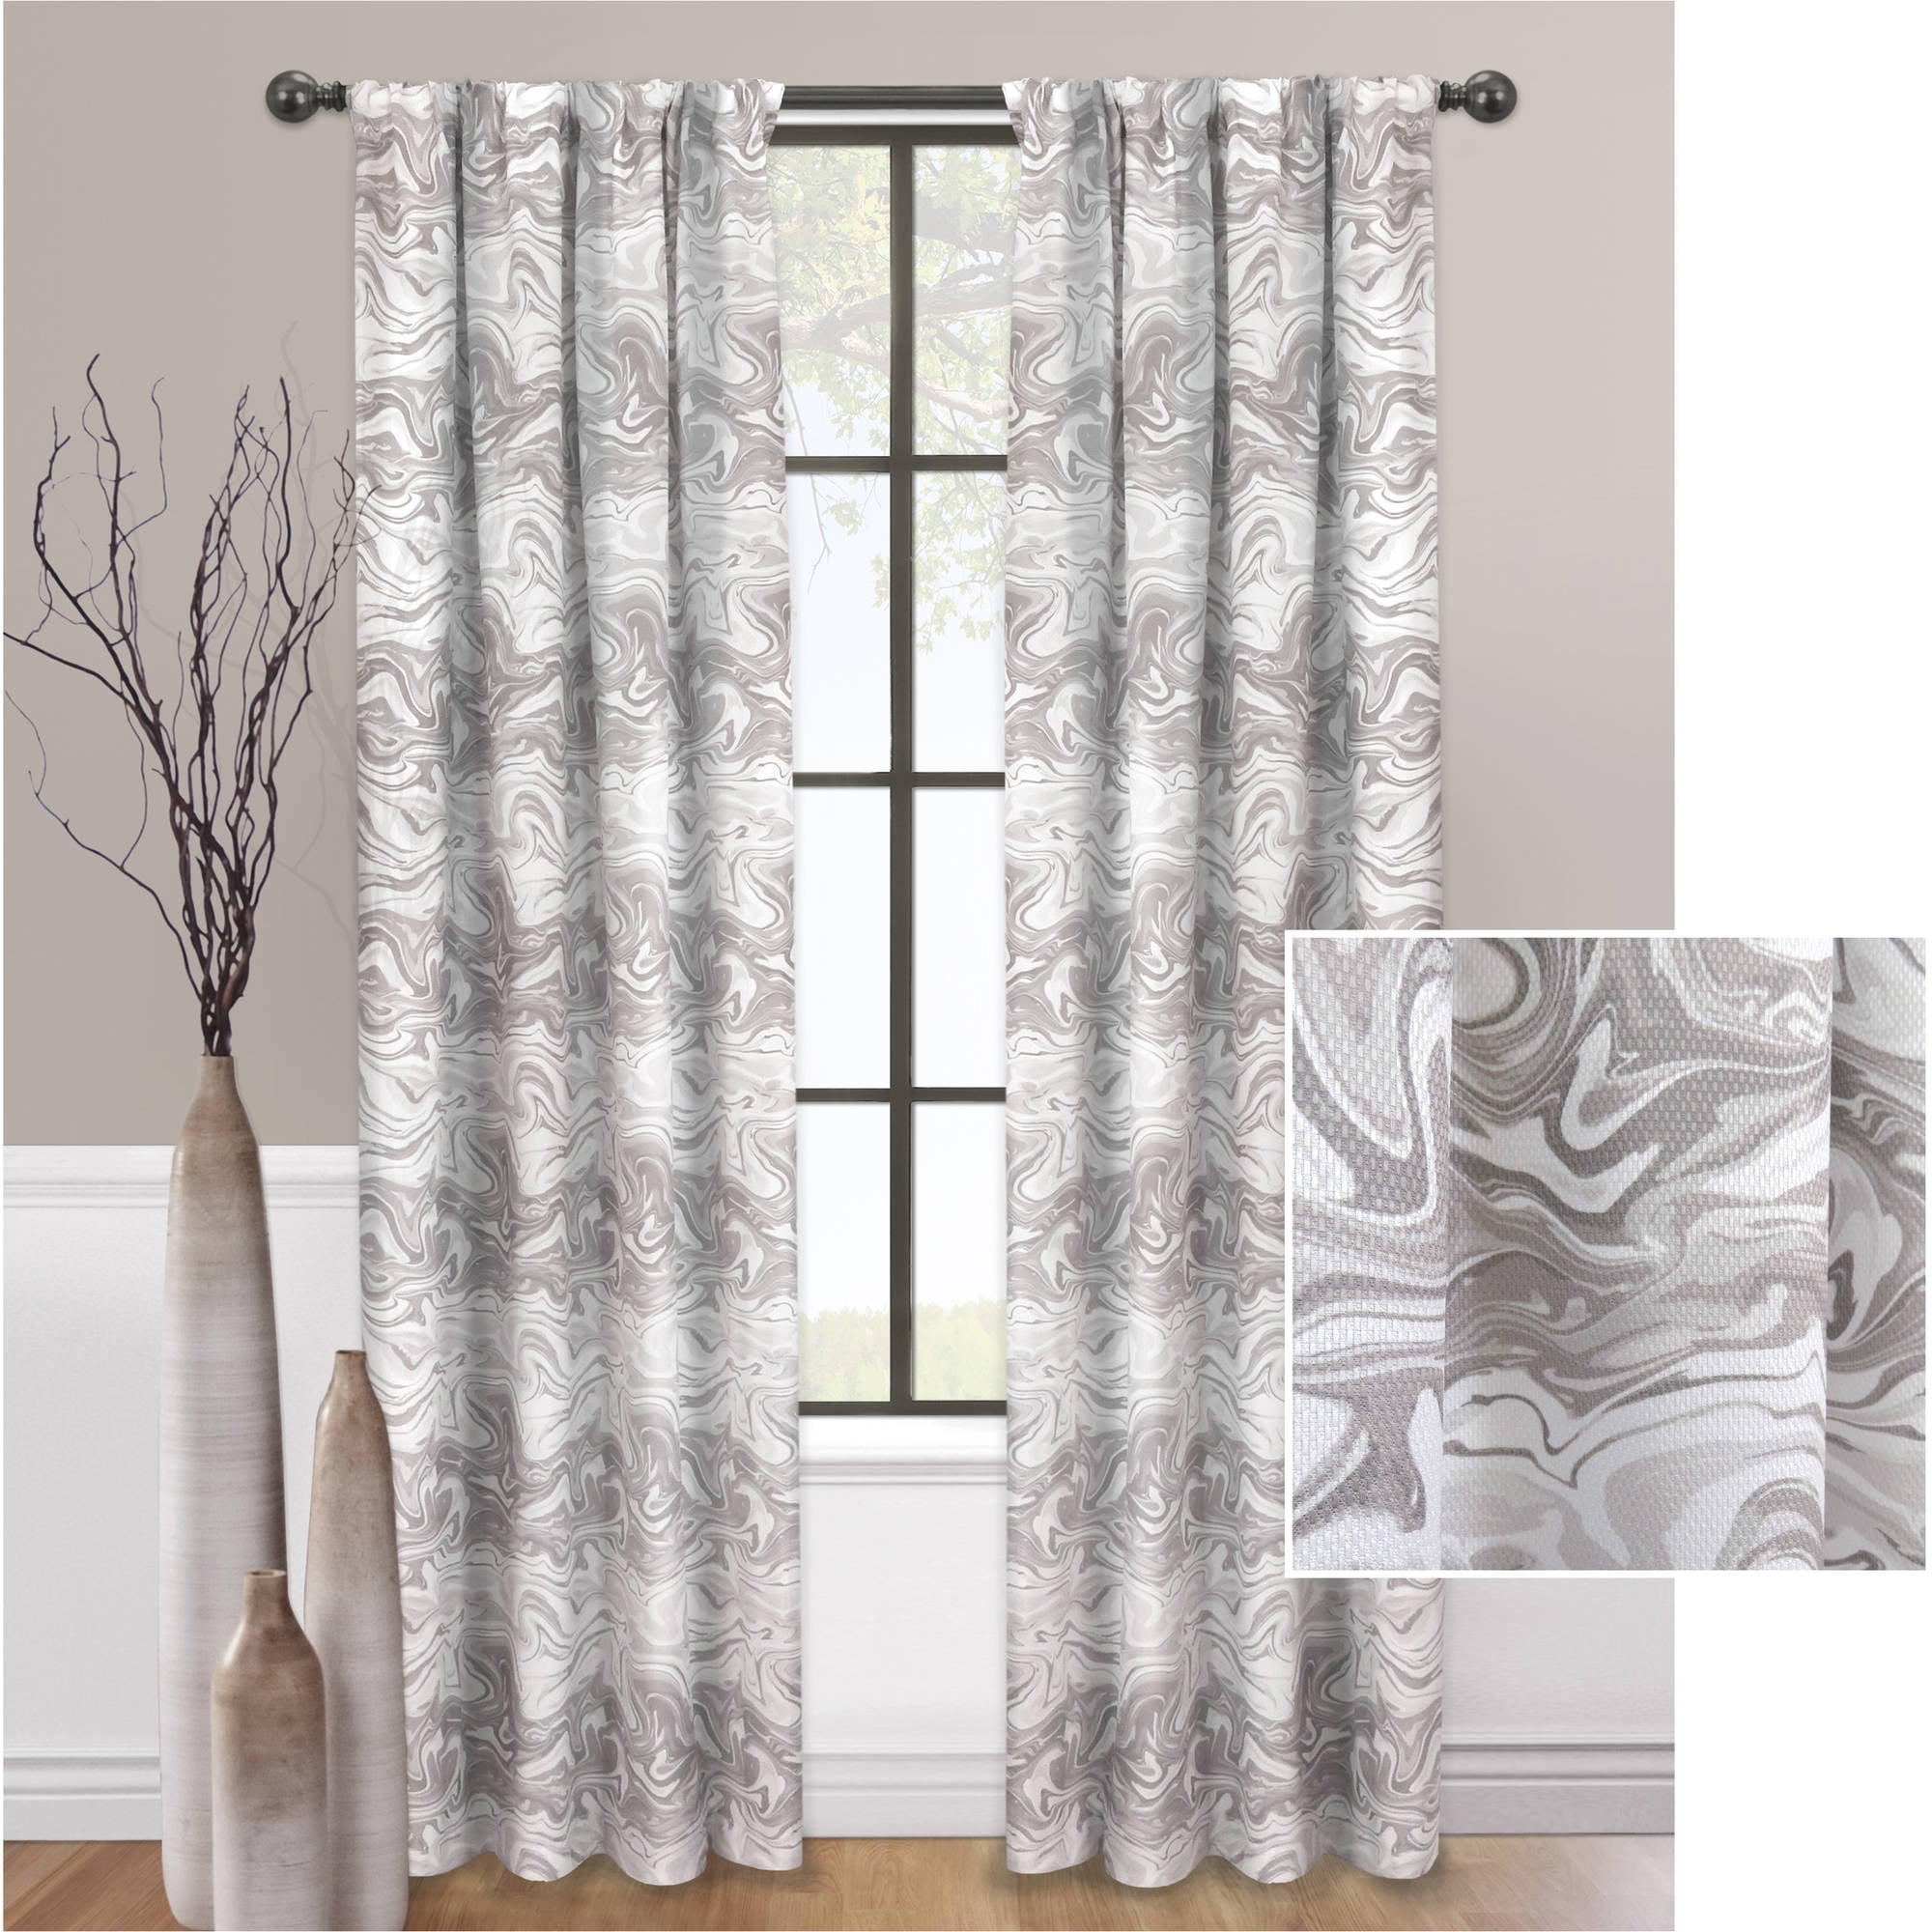 Details about   3D Marble Pattern Window Curtains 2 Panels Decor Curtain Drapes For Teens Adults 